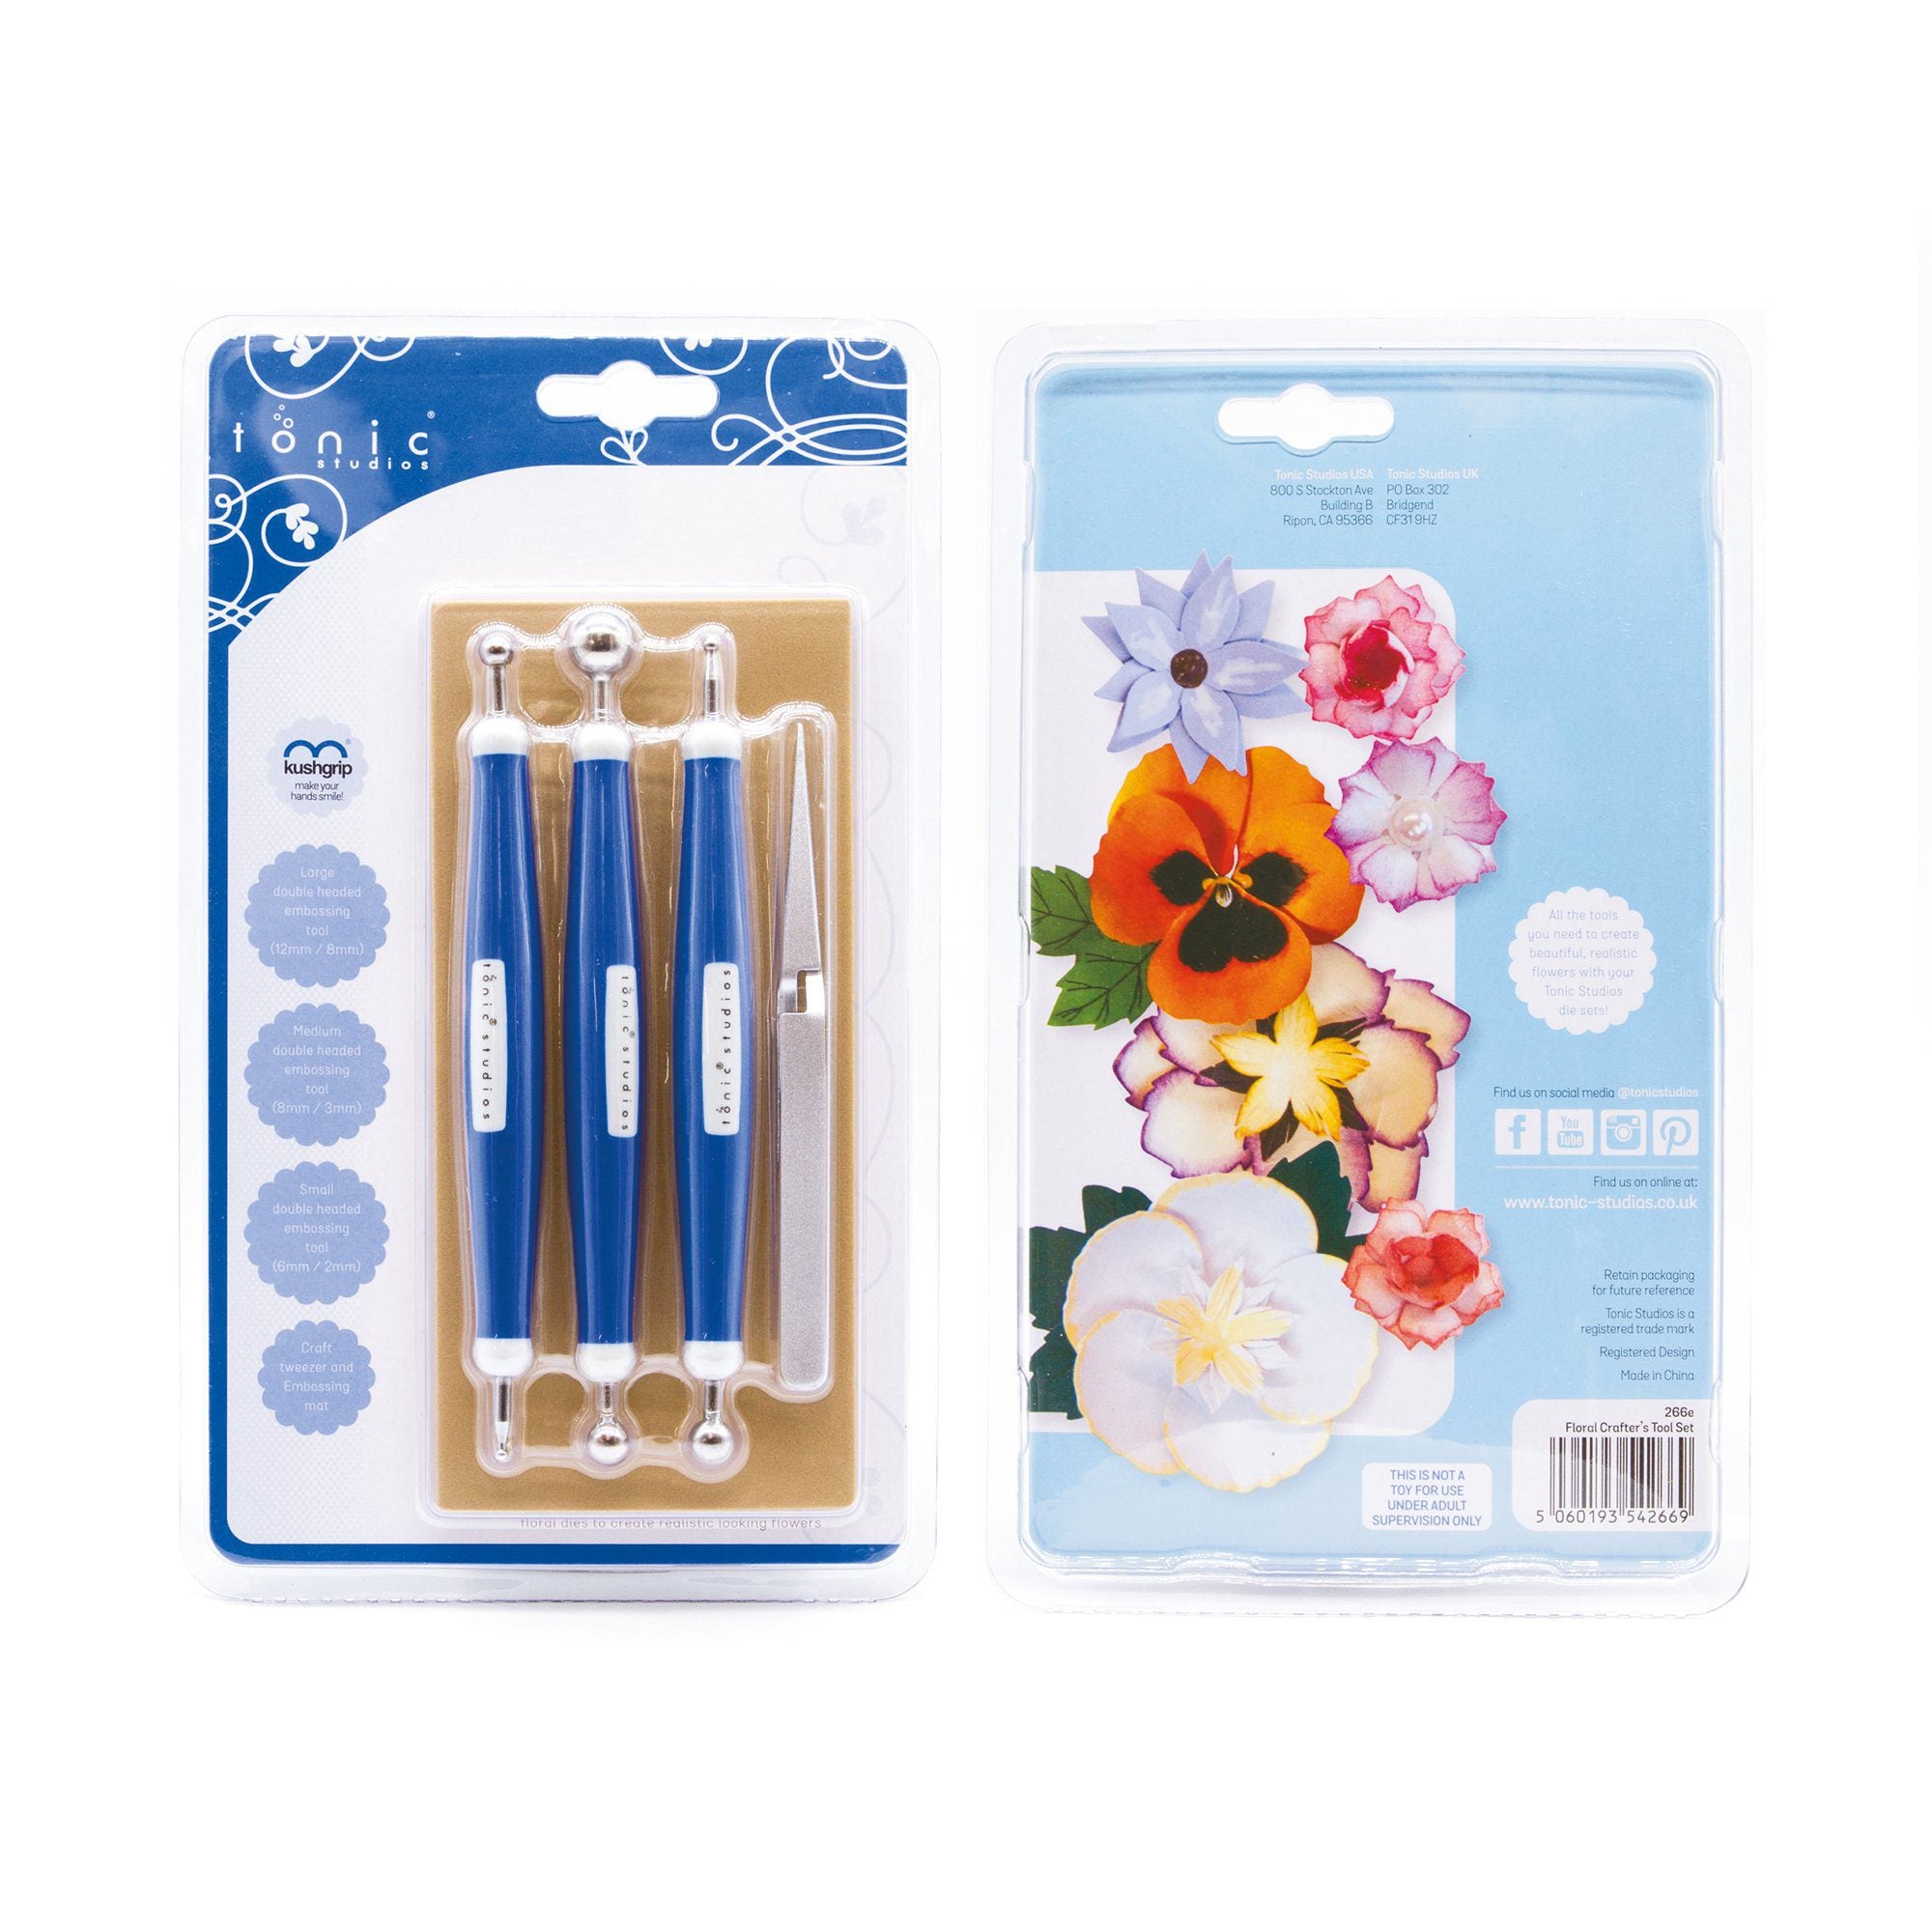 Favorite Craft Tools Finds for Crafters